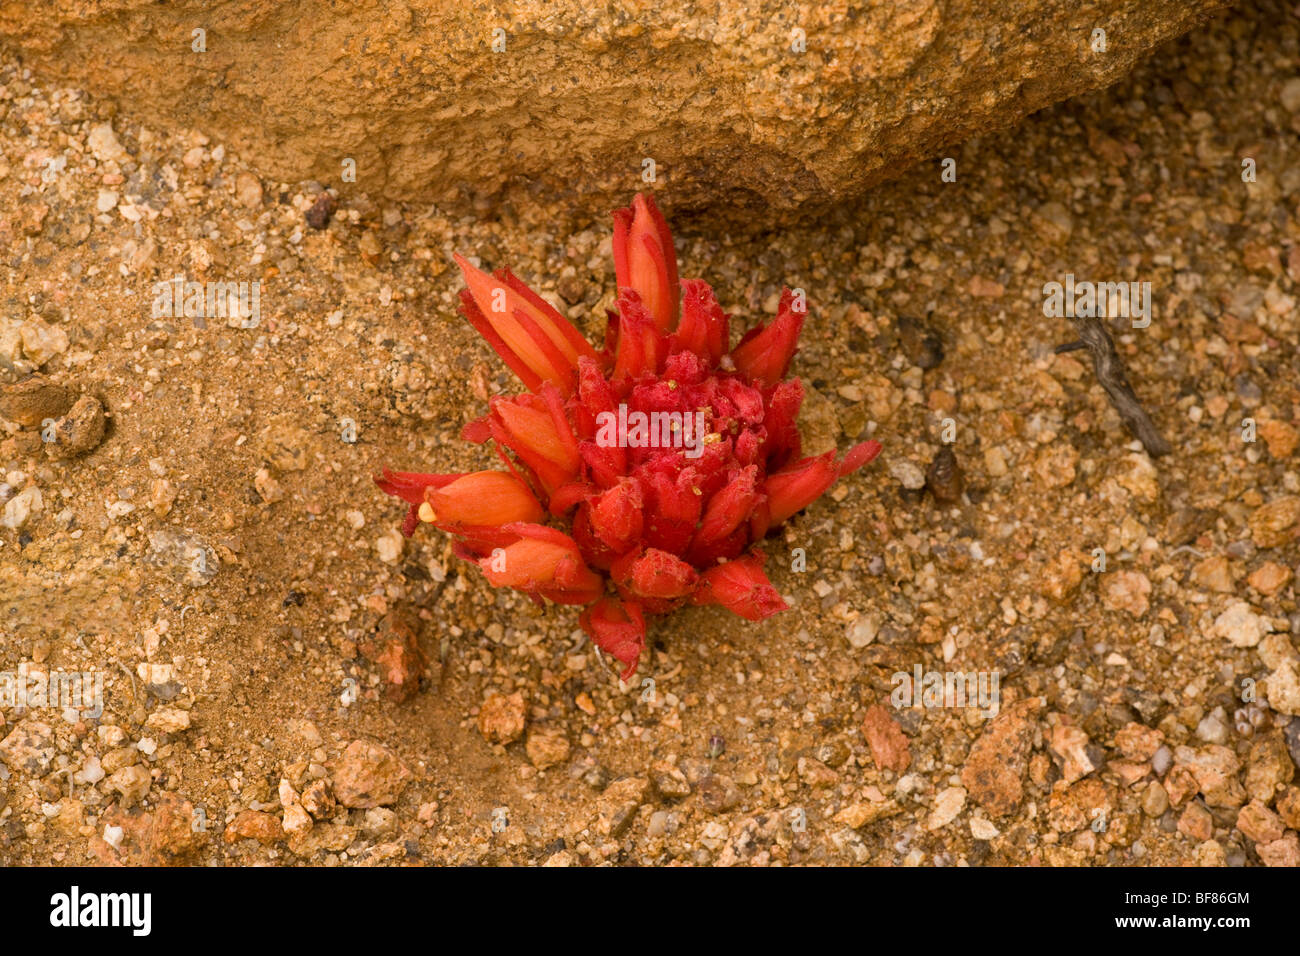 The parasitic plant, Cat’s claw Hyobanche sanguinea, Namaqualand, South Africa Stock Photo